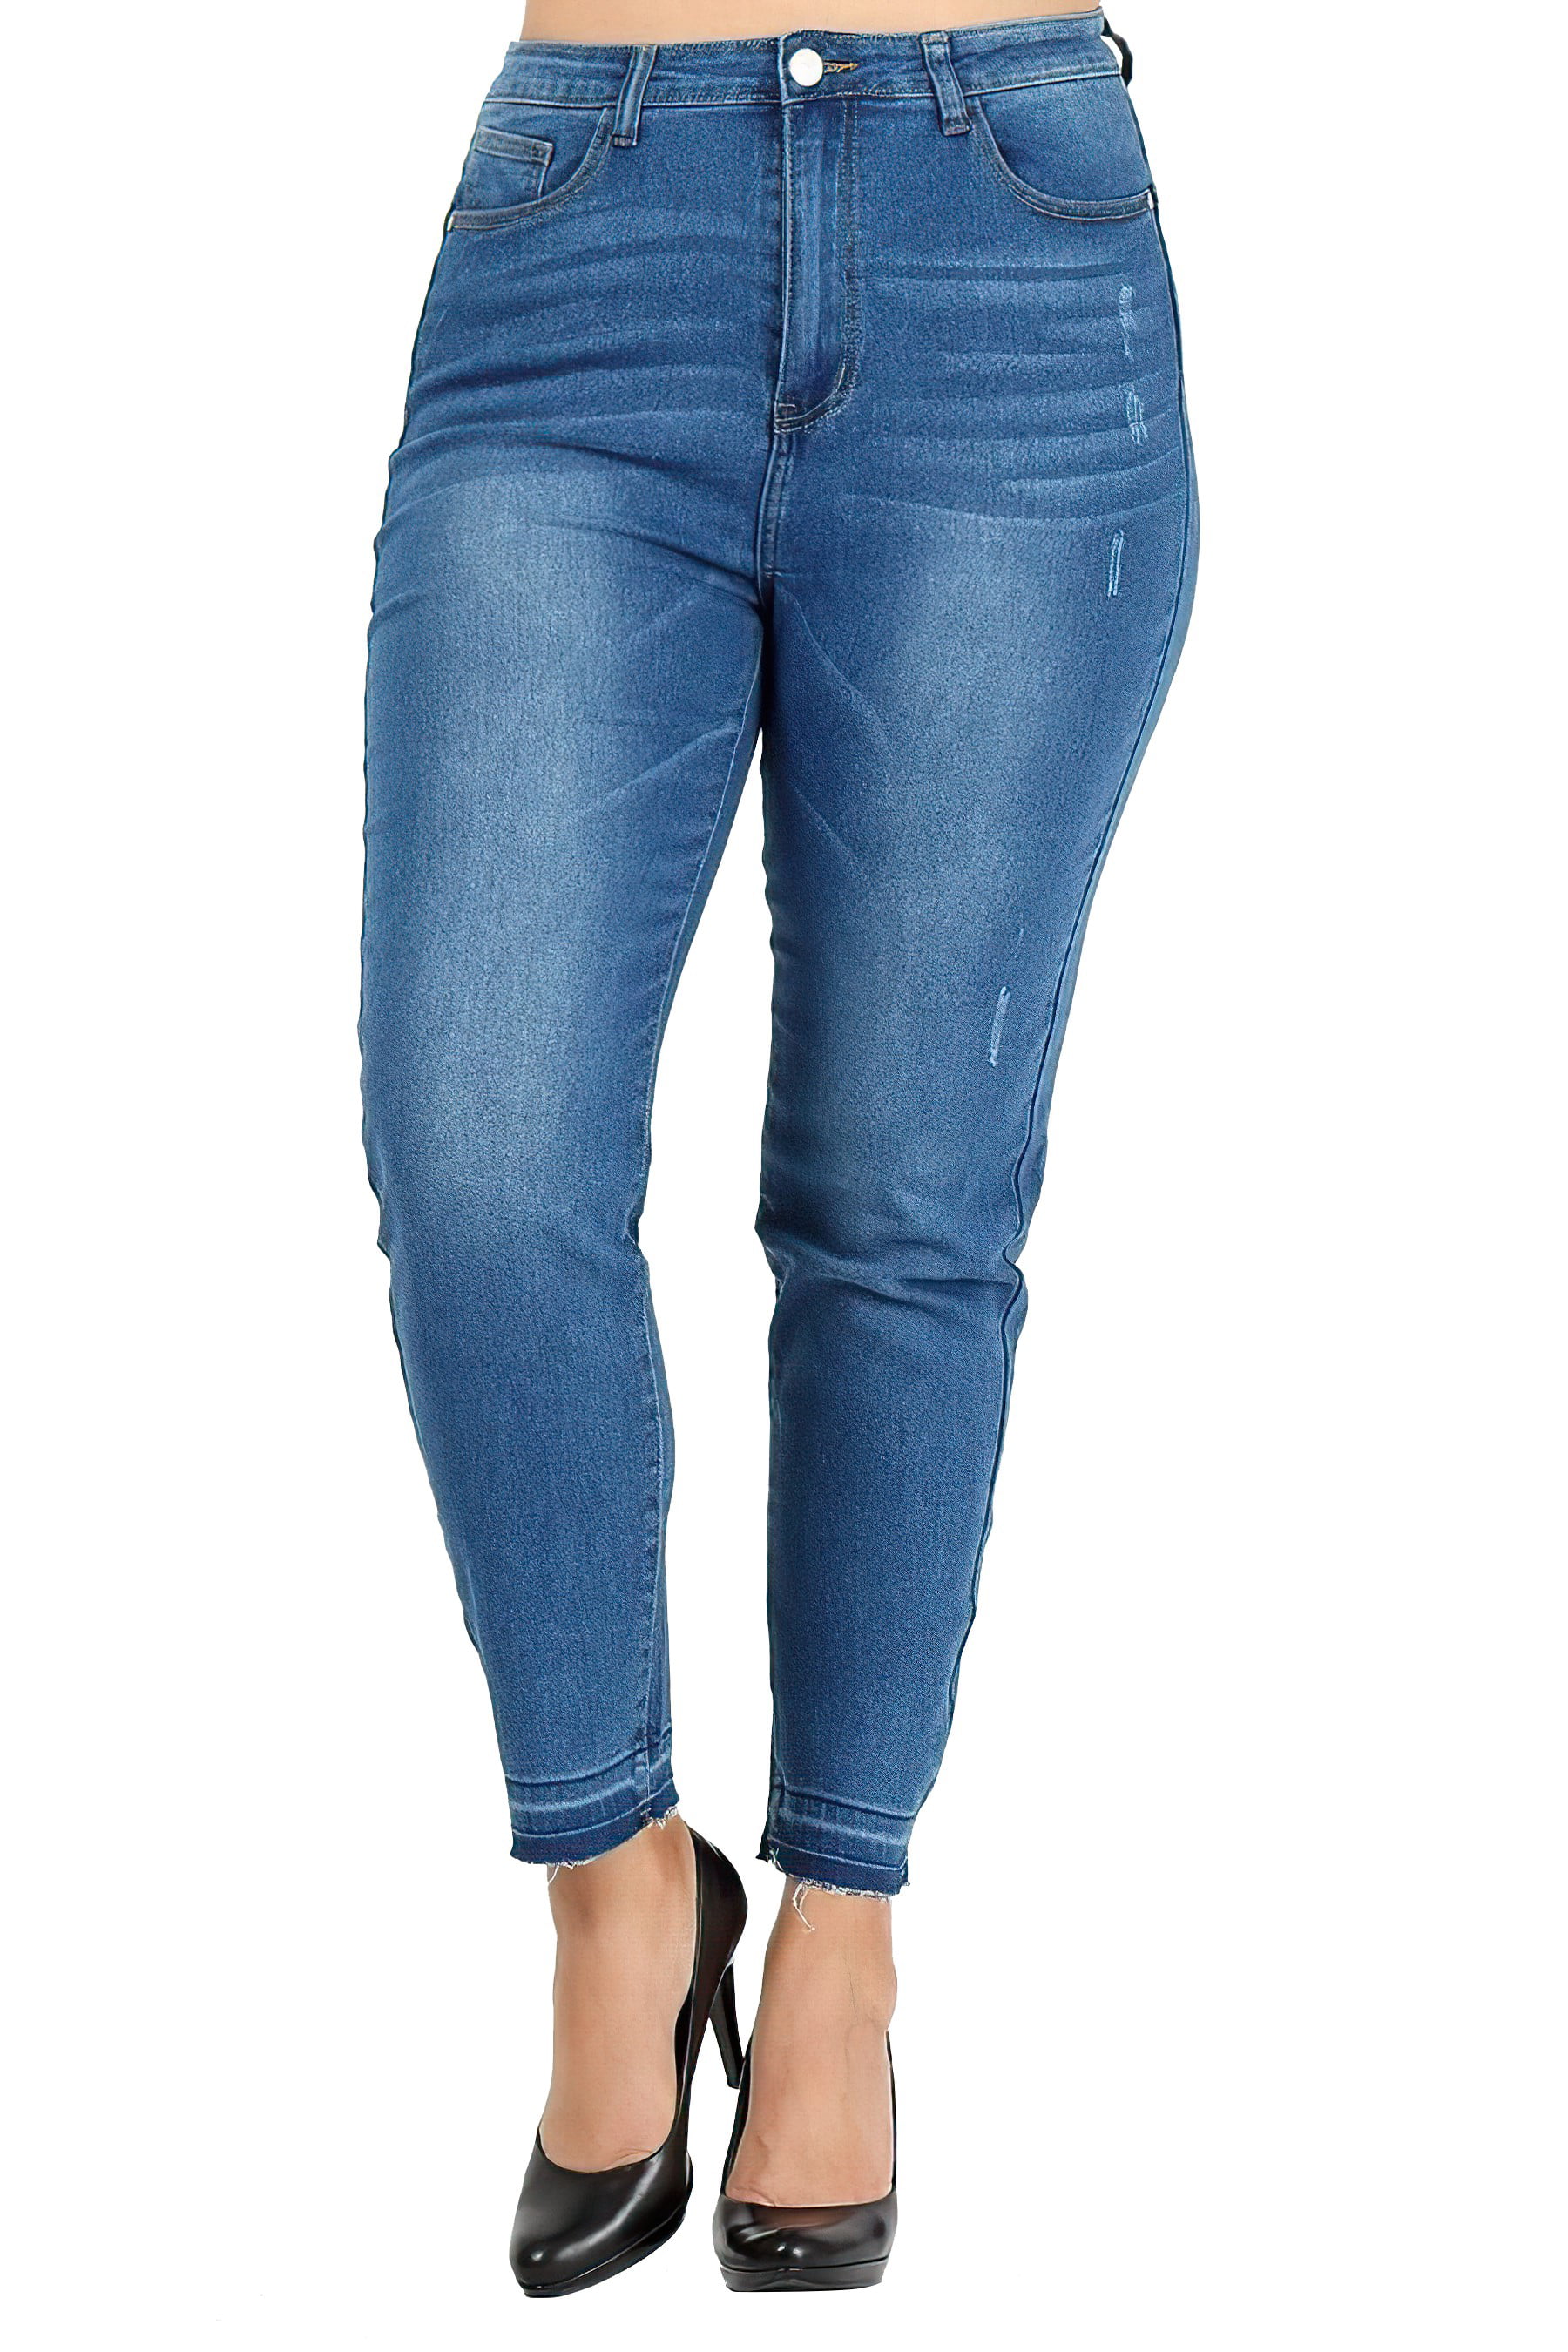 high waisted stretch jeans plus size